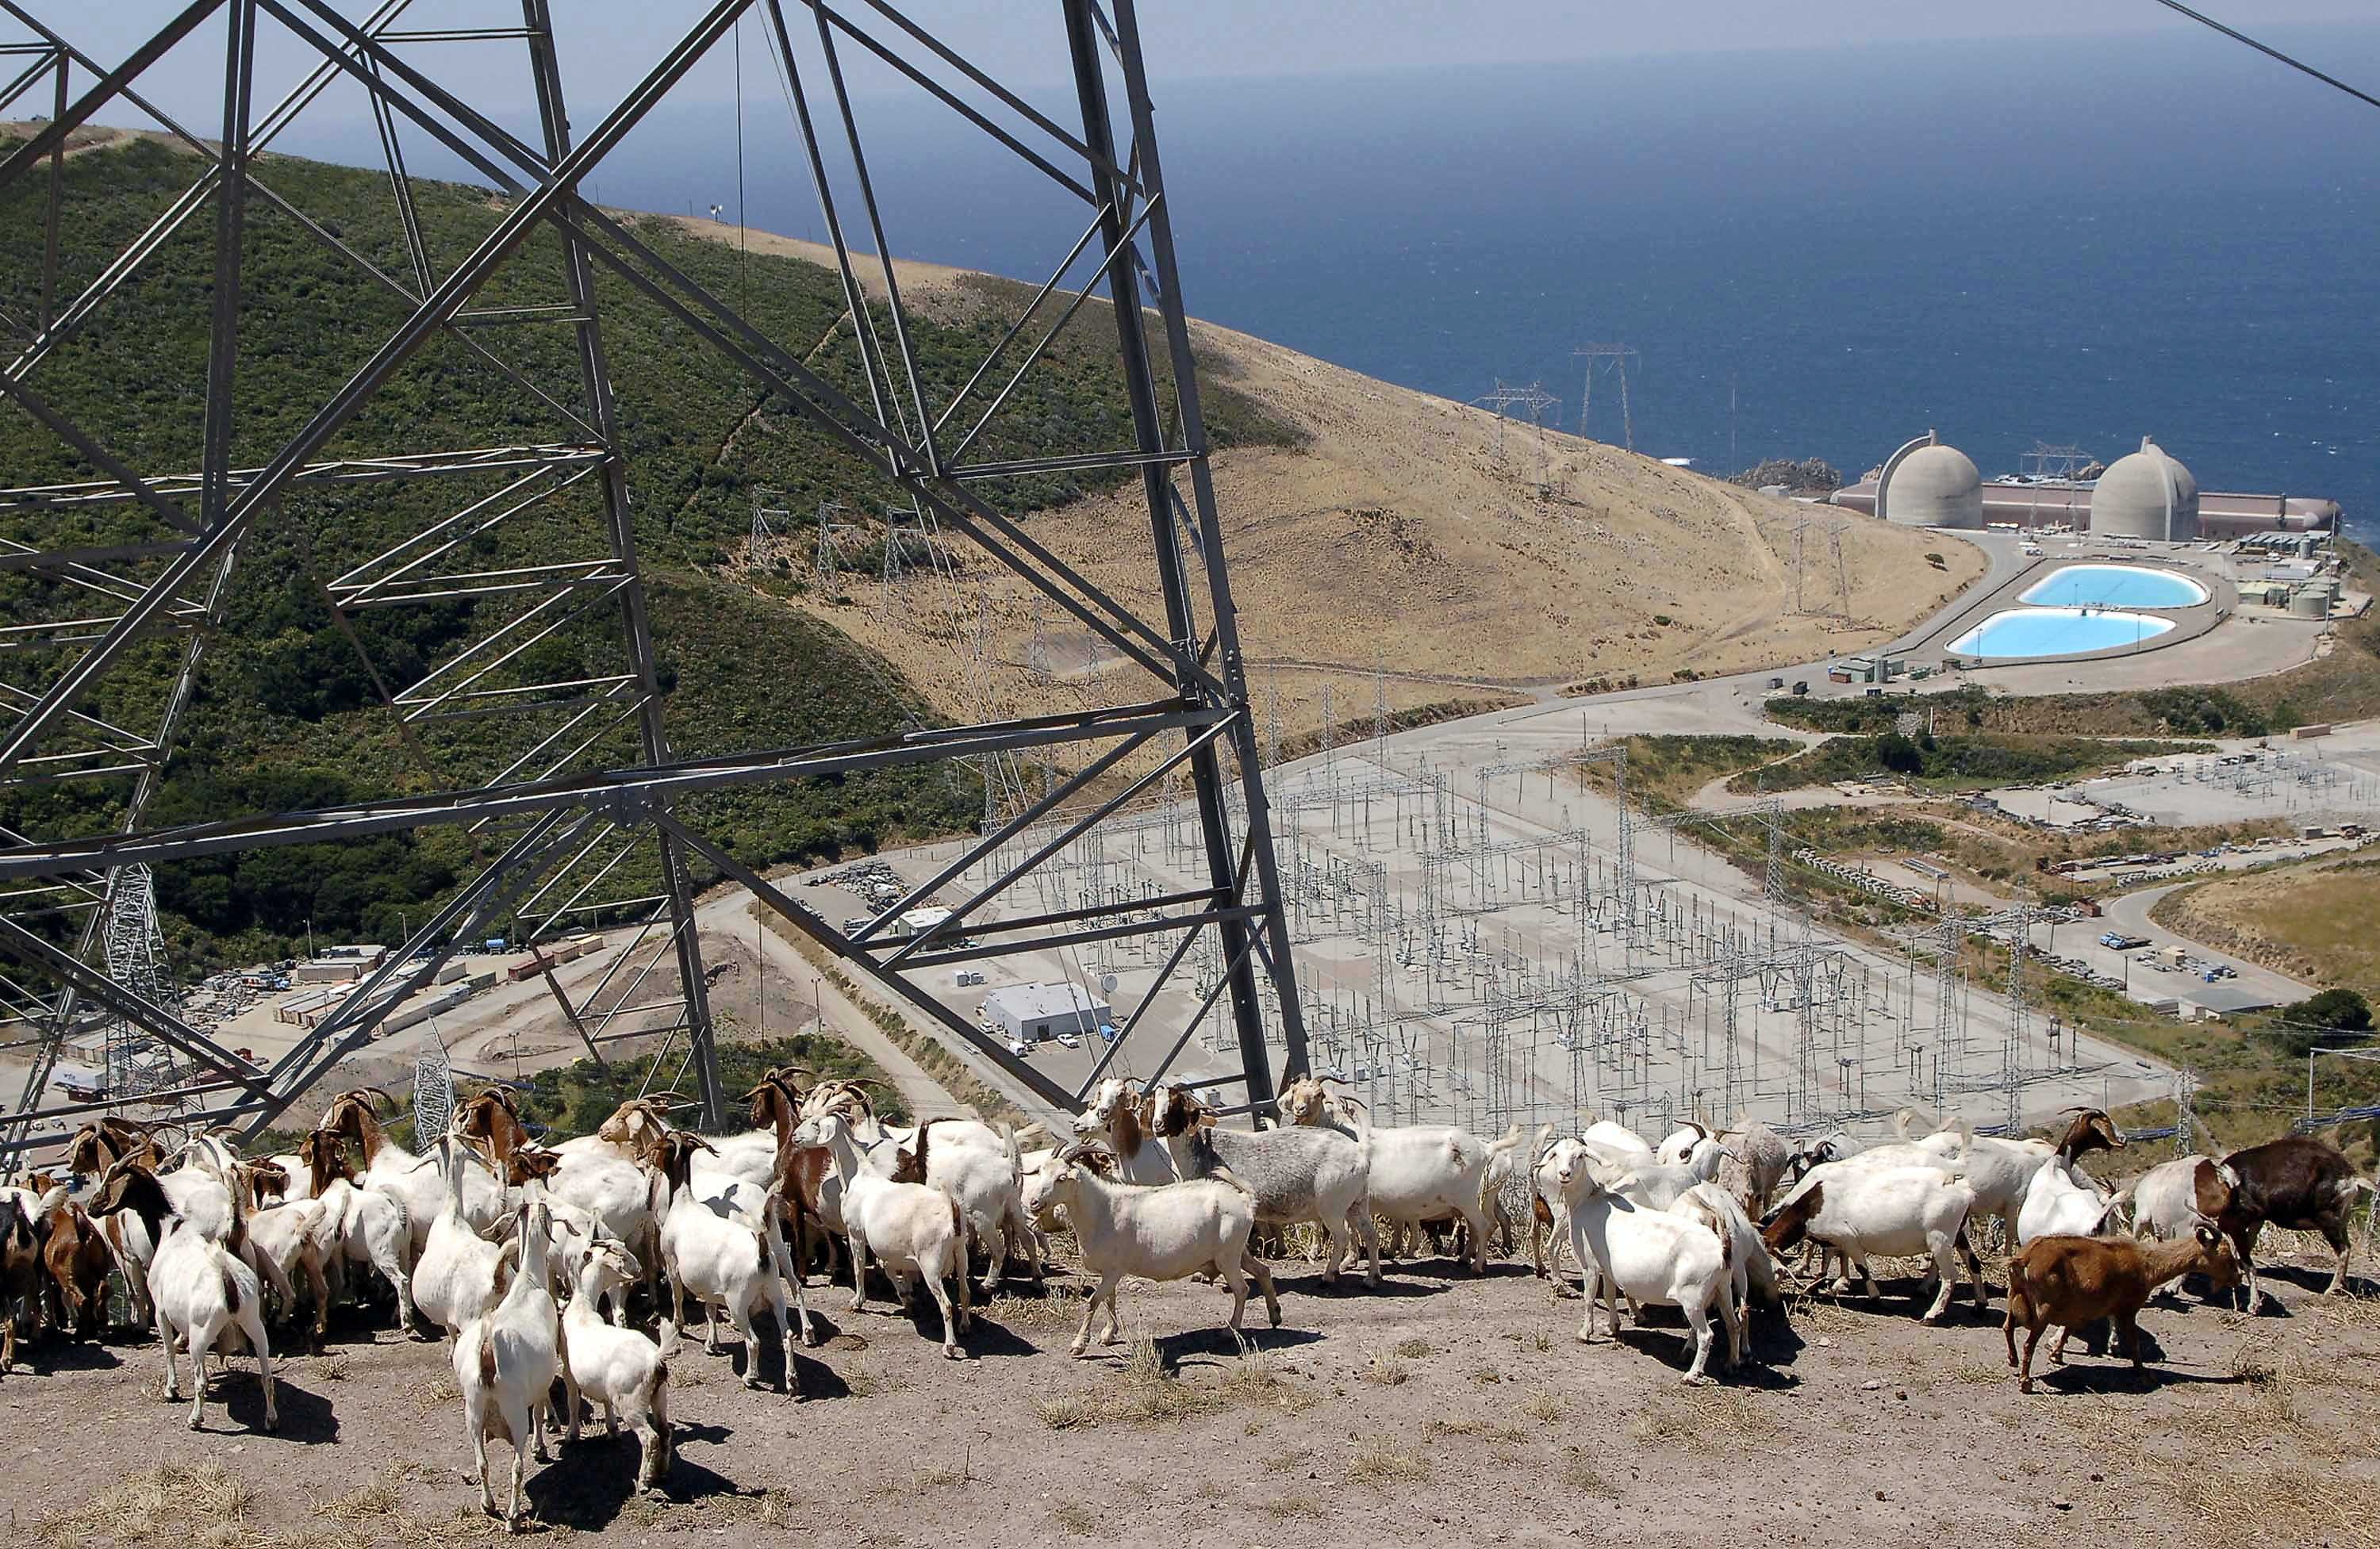 A flock of goats gather under a set of power lines above Diablo Canyon nuclear power plant at Avila Beach, California. REUTERS/Phil Klein/File Photo